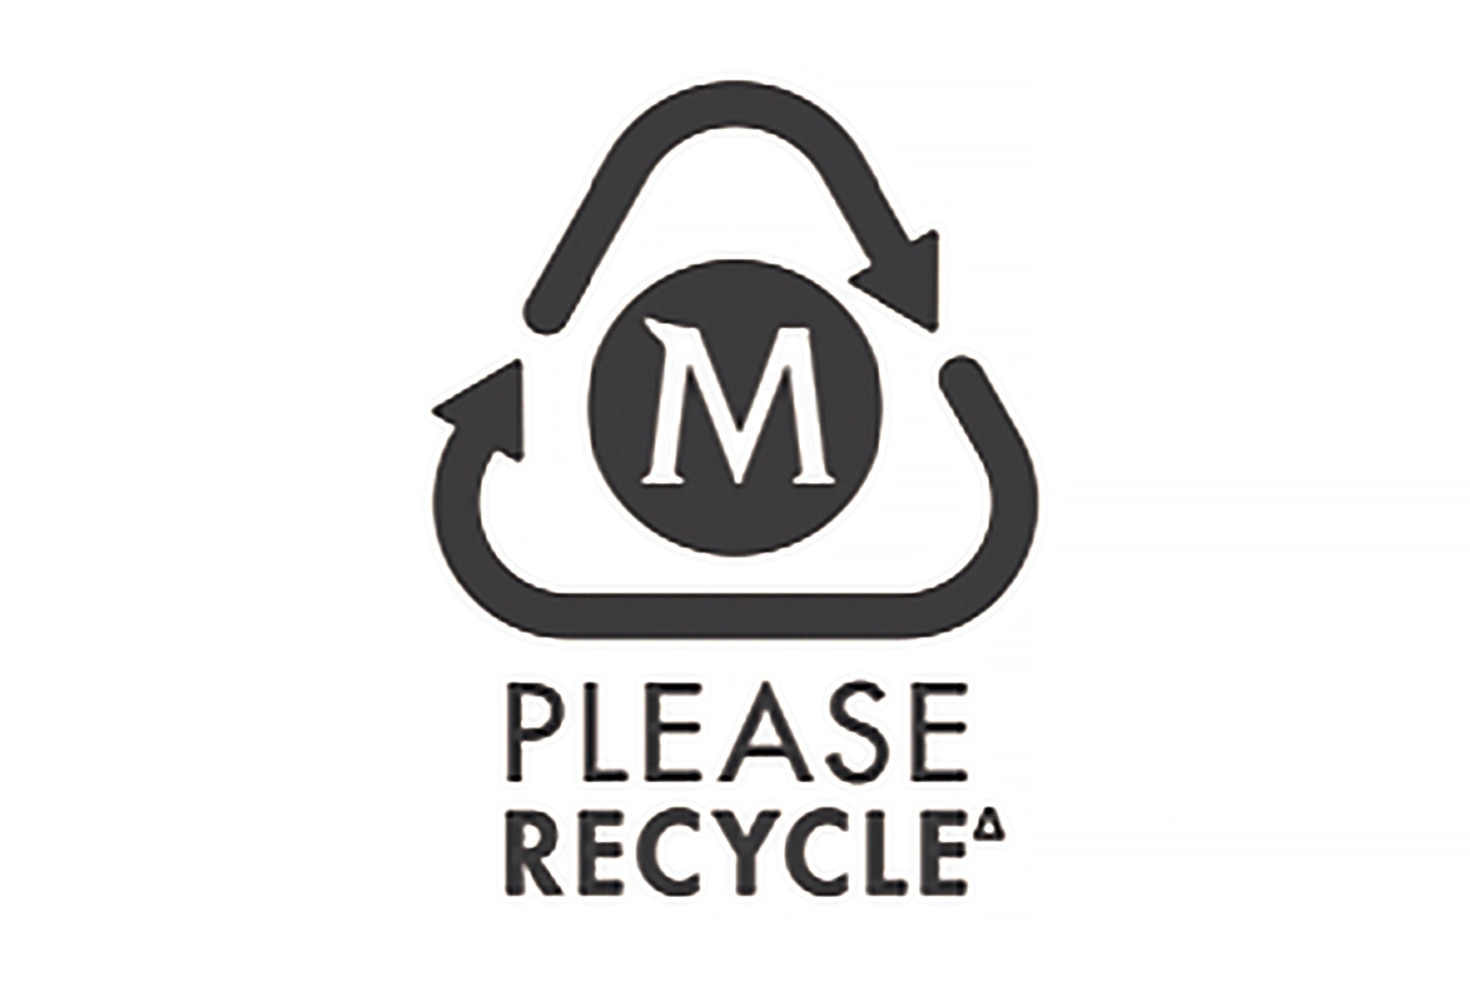 Magnum please recycle logo